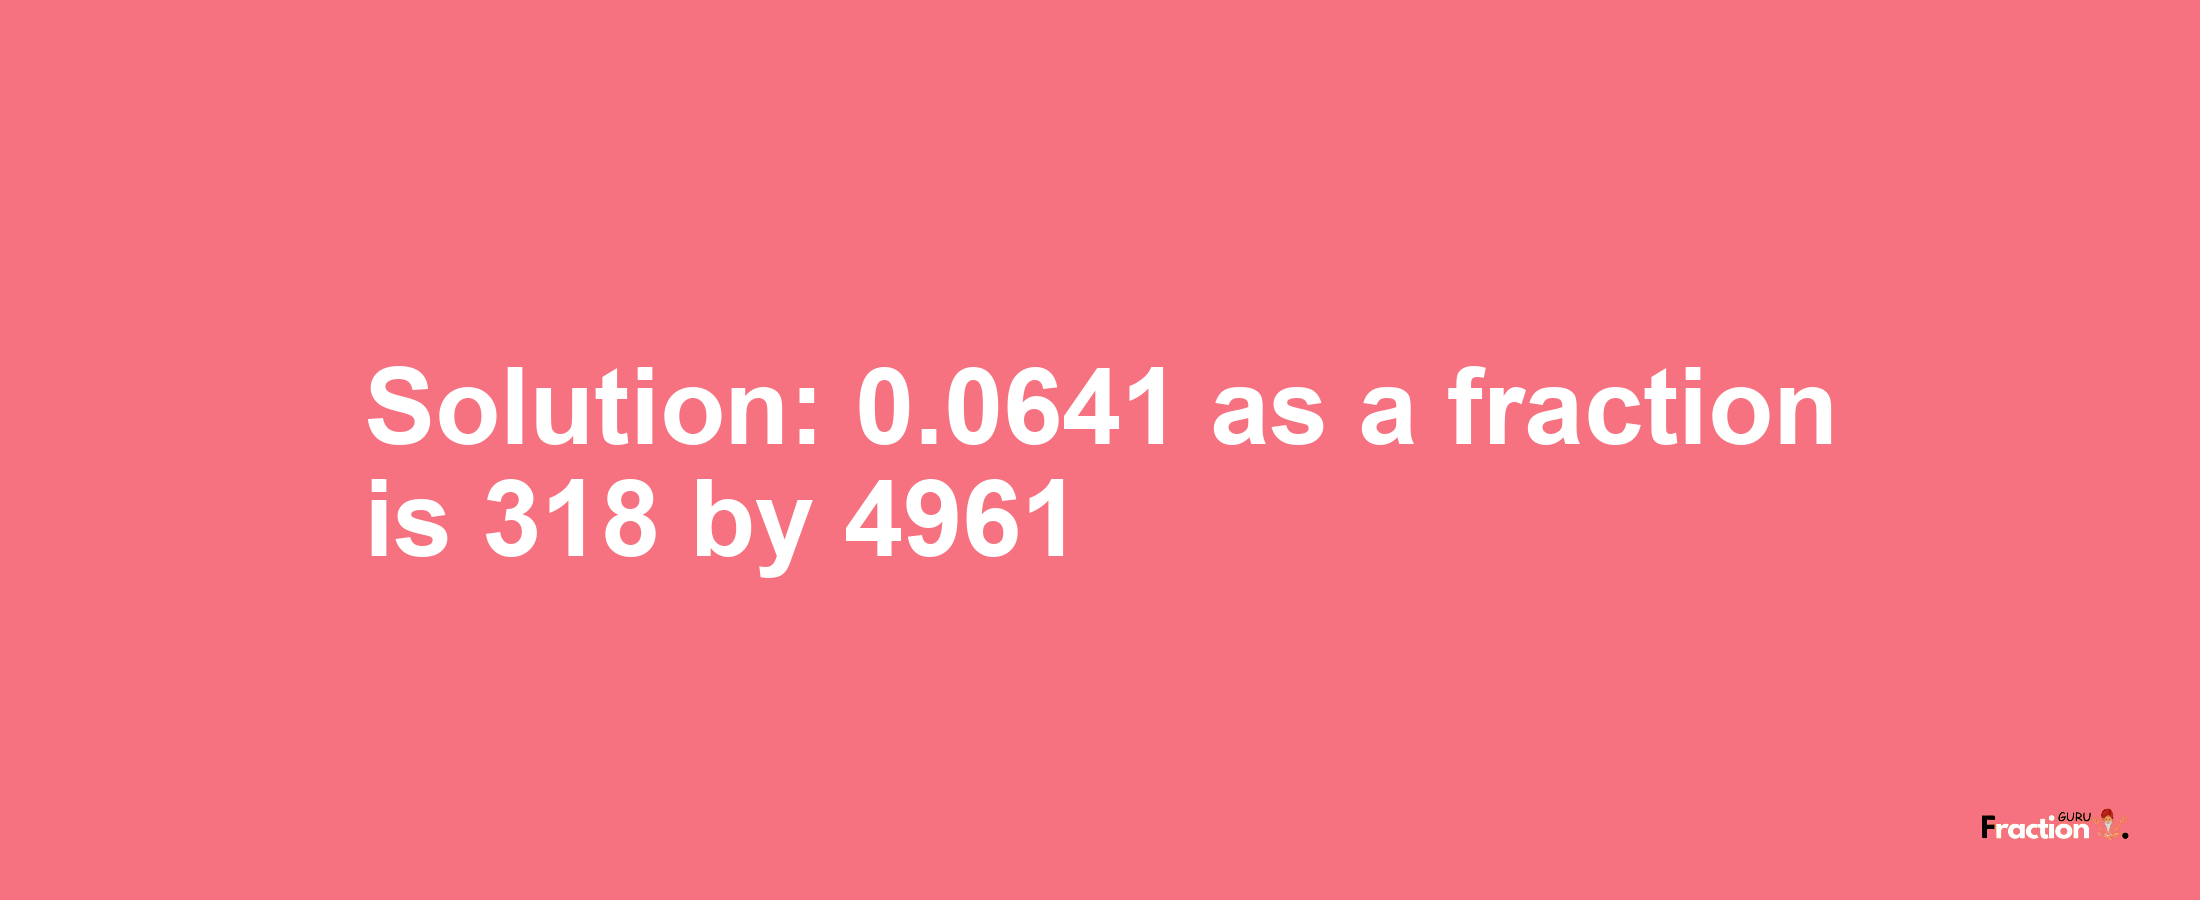 Solution:0.0641 as a fraction is 318/4961